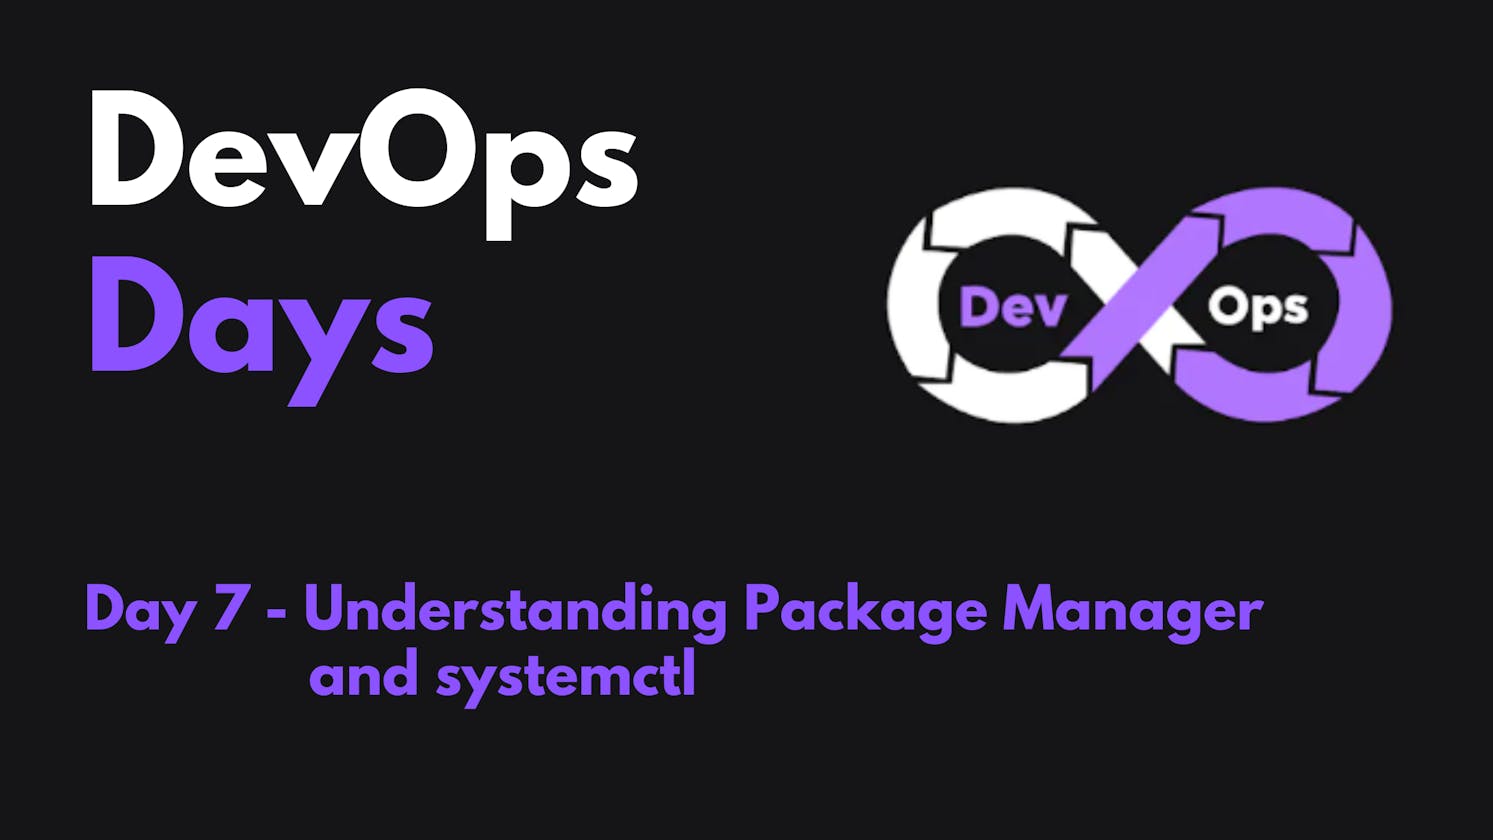 Day 7 - Understanding Package Manager and systemctl